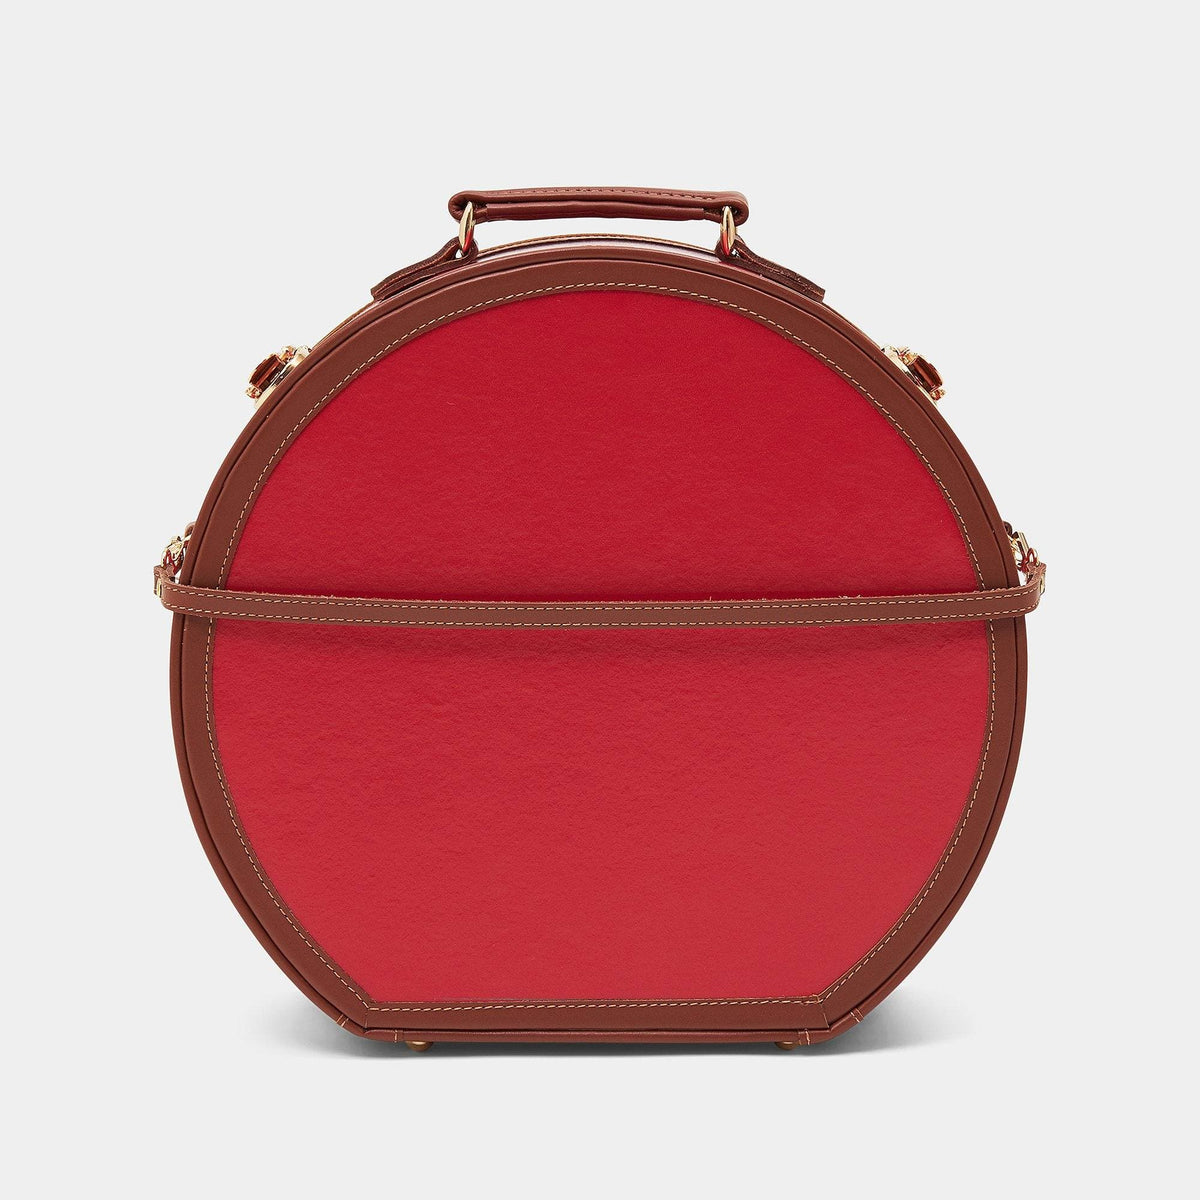 The Diplomat - Red Hatbox Large Hatbox Large Steamline Luggage 